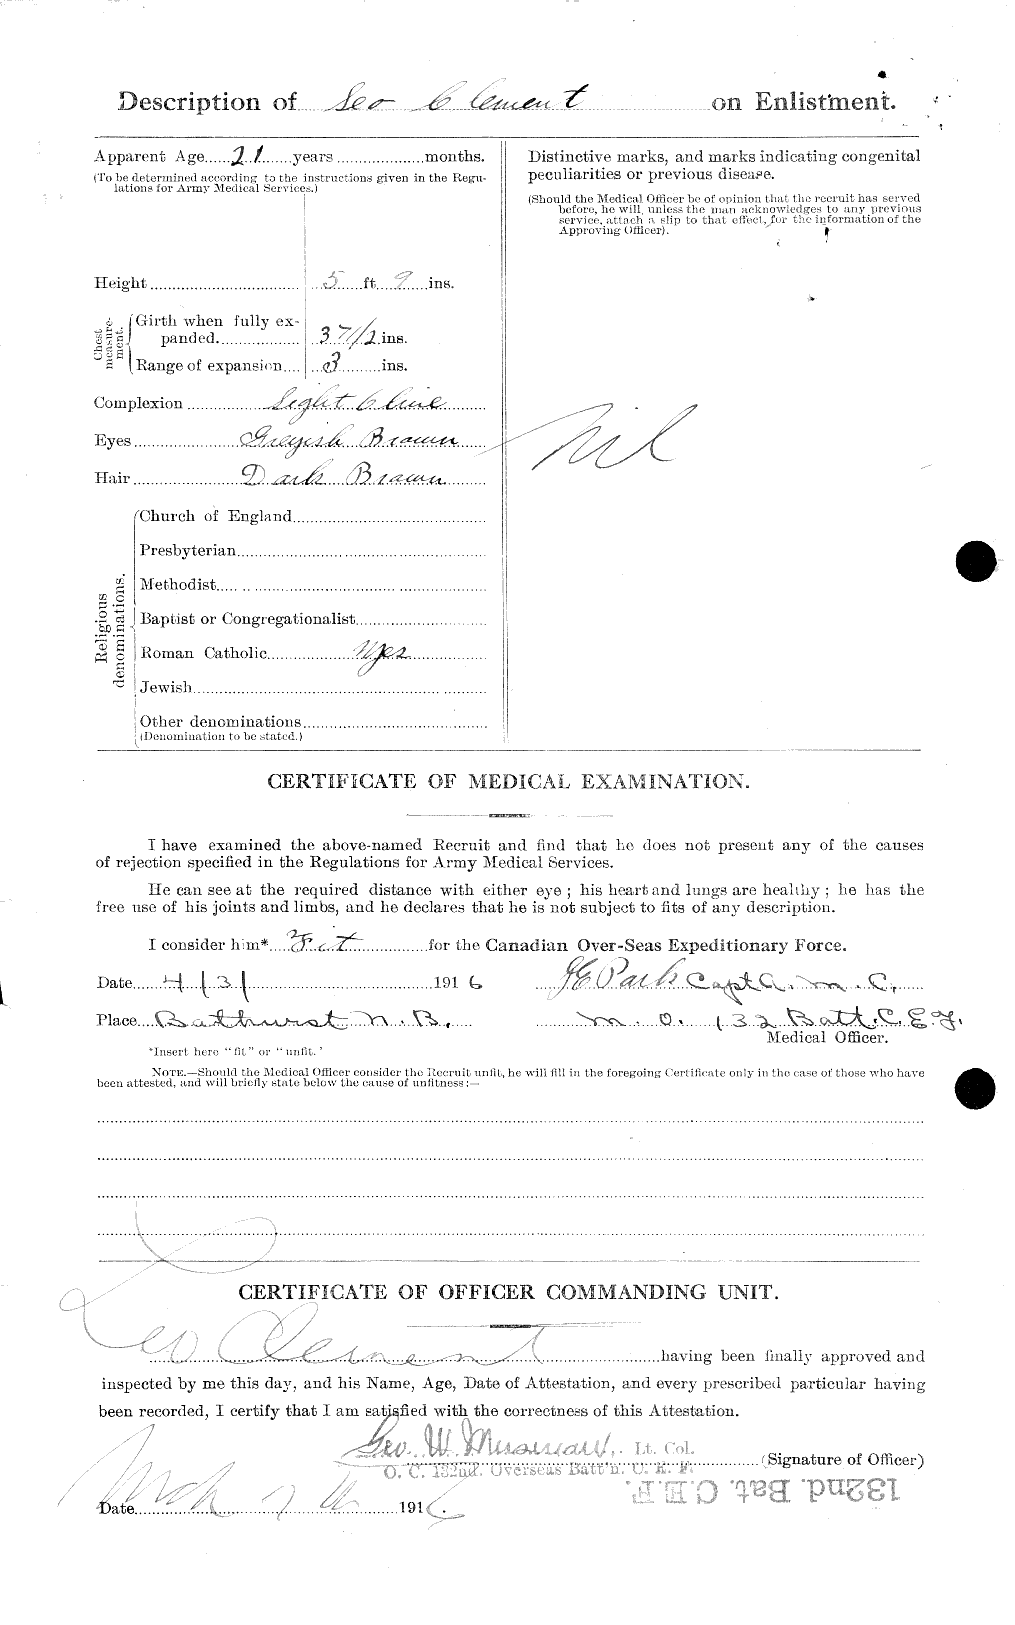 Personnel Records of the First World War - CEF 023883b